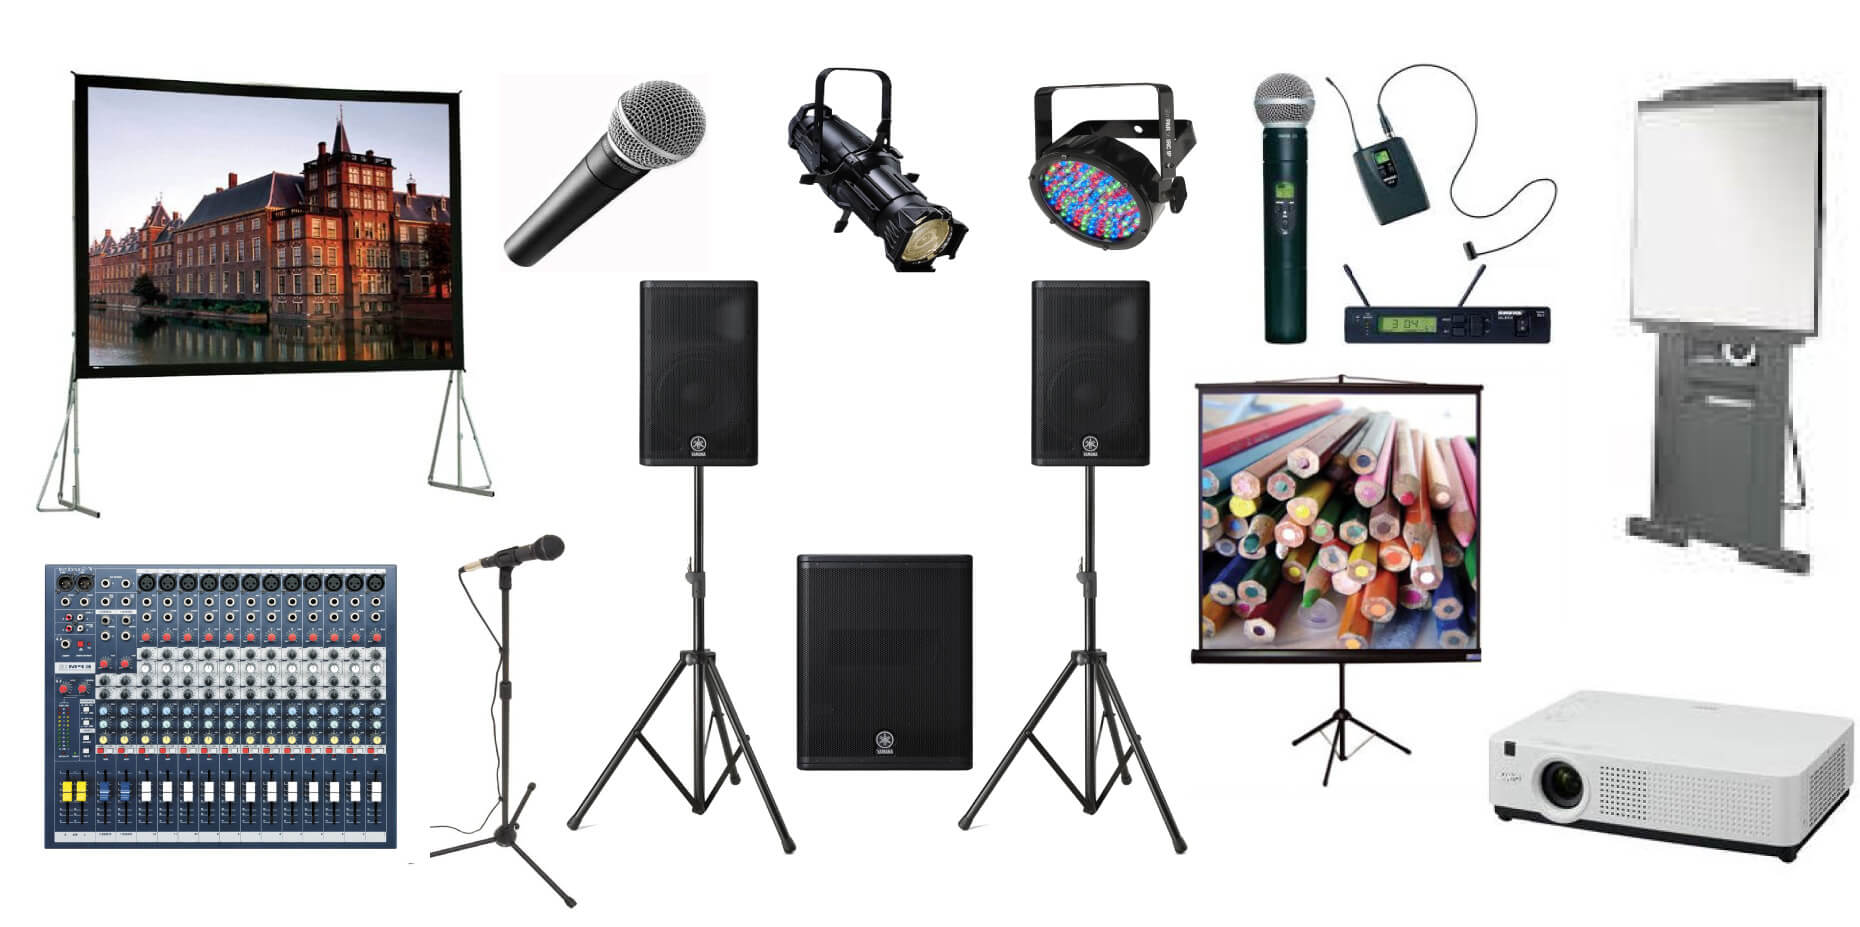 audio and visual presentation and composing equipment